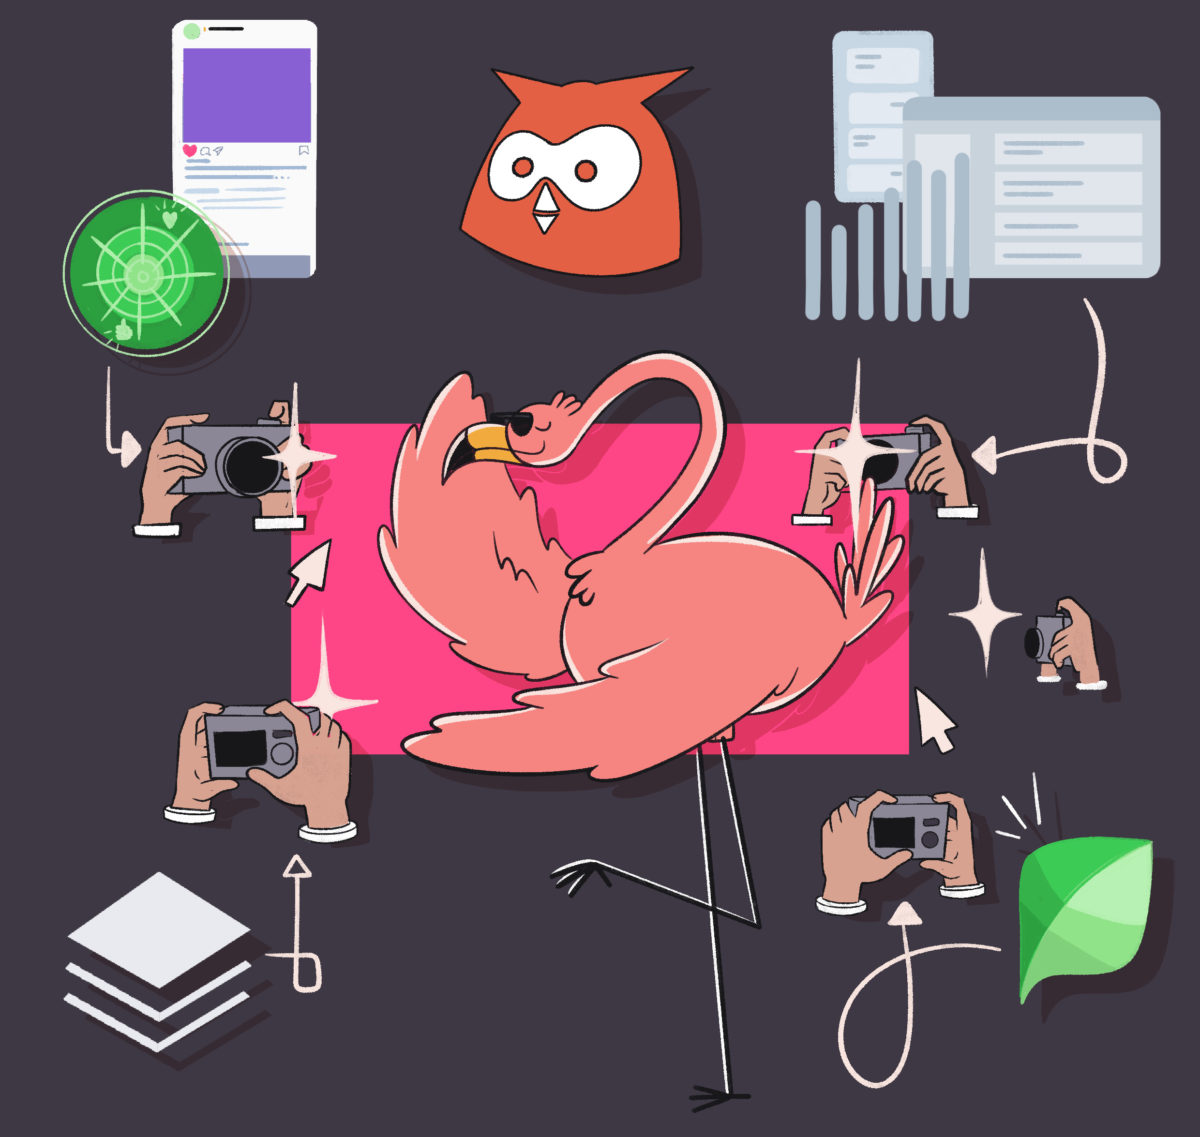 Illustration of various design and creative process elements with an owl icon and a central flamingo being photographed from multiple angles.